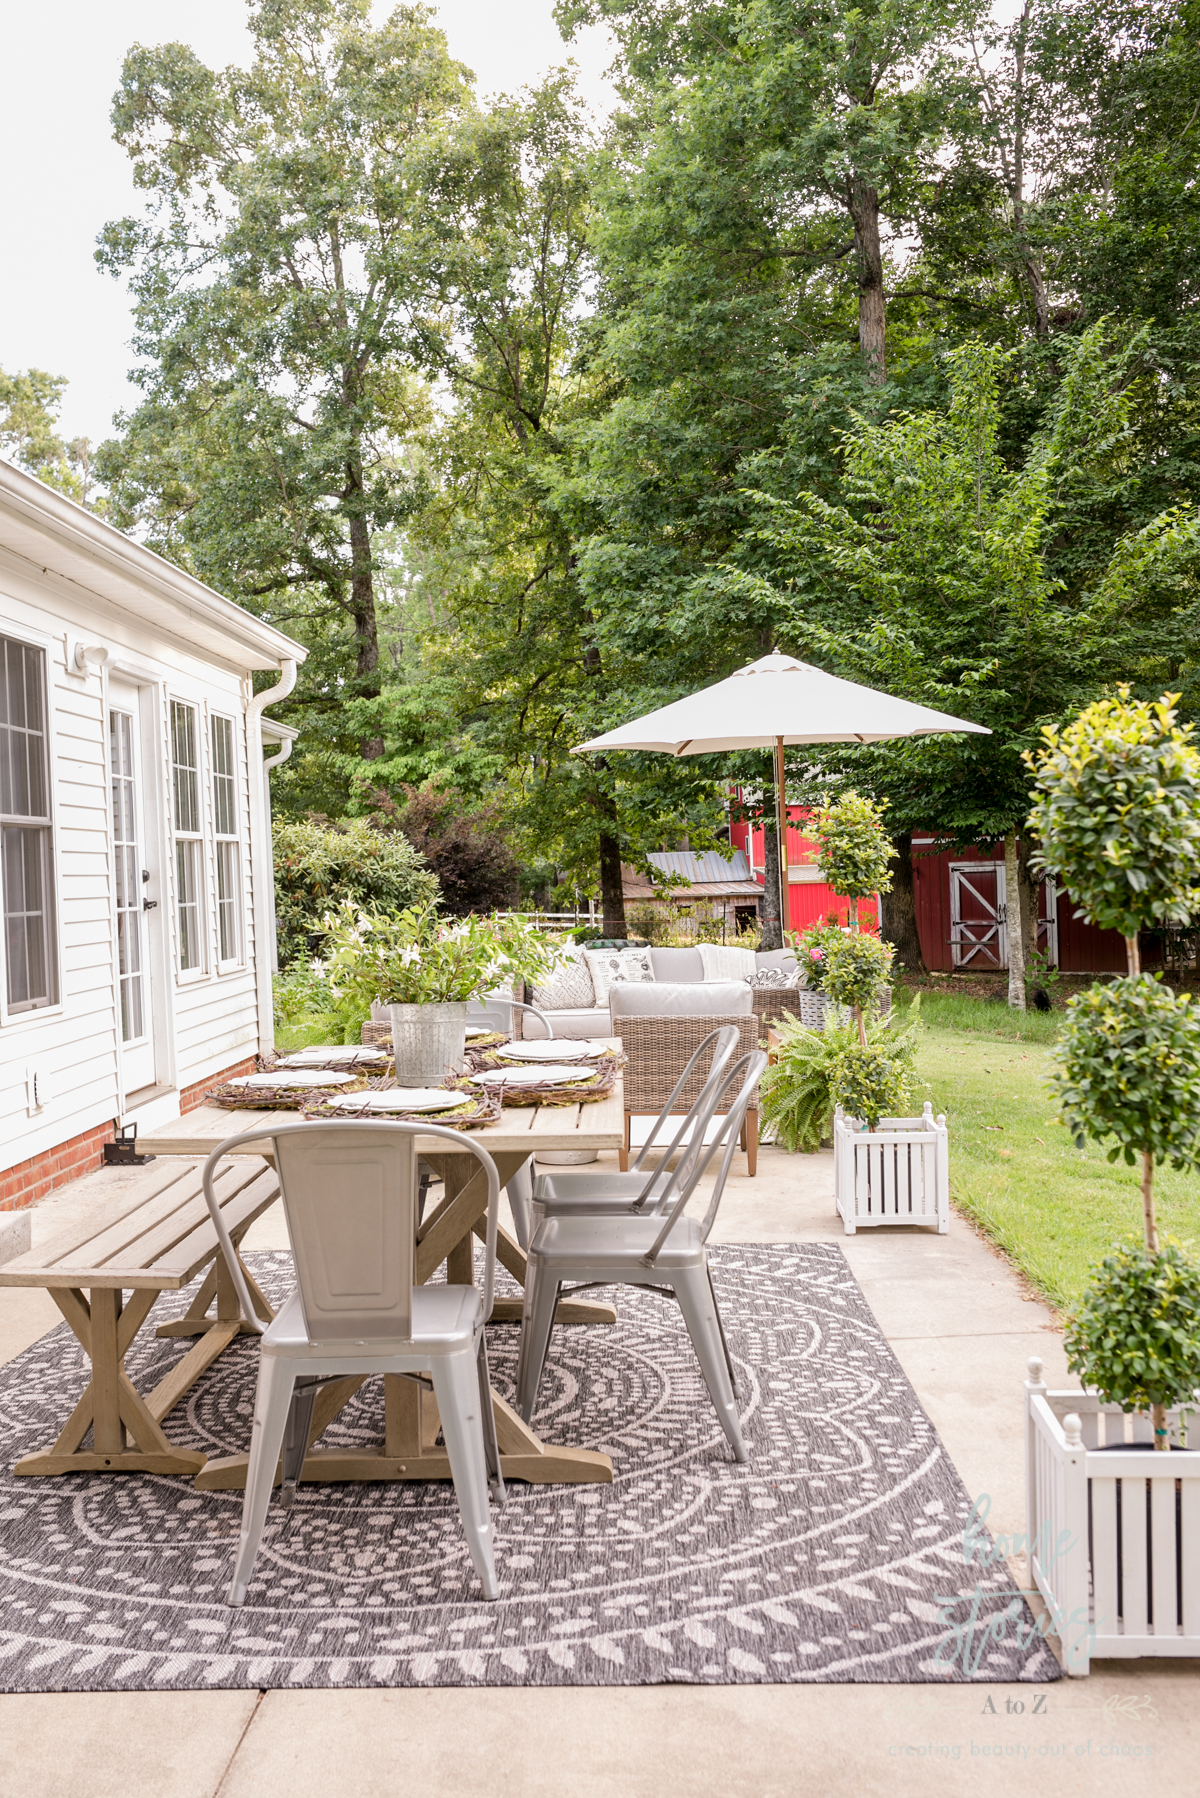 Beautiful Neutral Summer Patio Decorating Ideas and Tips